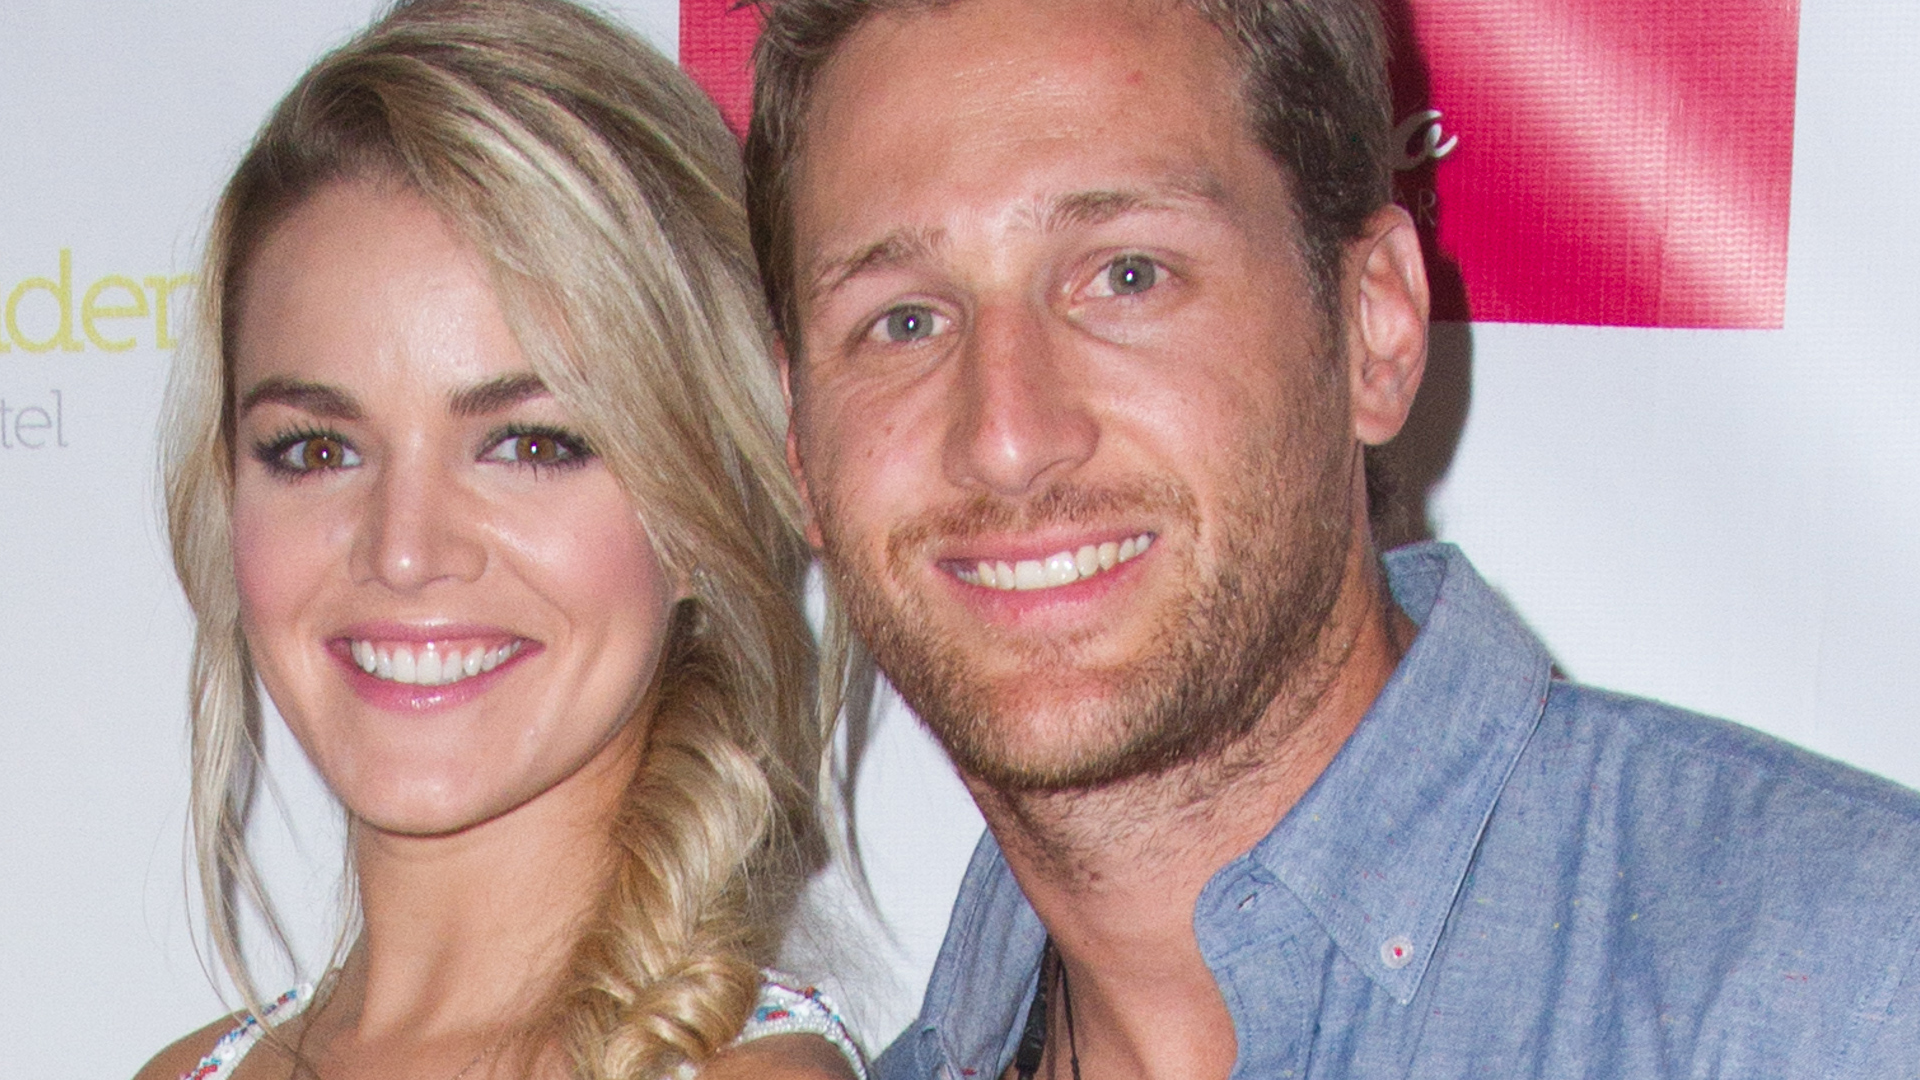 'The Bachelor' Season 18 stars Nikki Ferrell and Juan Pablo Galavis attend Juan Pablo Galavis birthday bash party at Flamingo Theater Bar on August 7, 2014 in Miami, Florida.